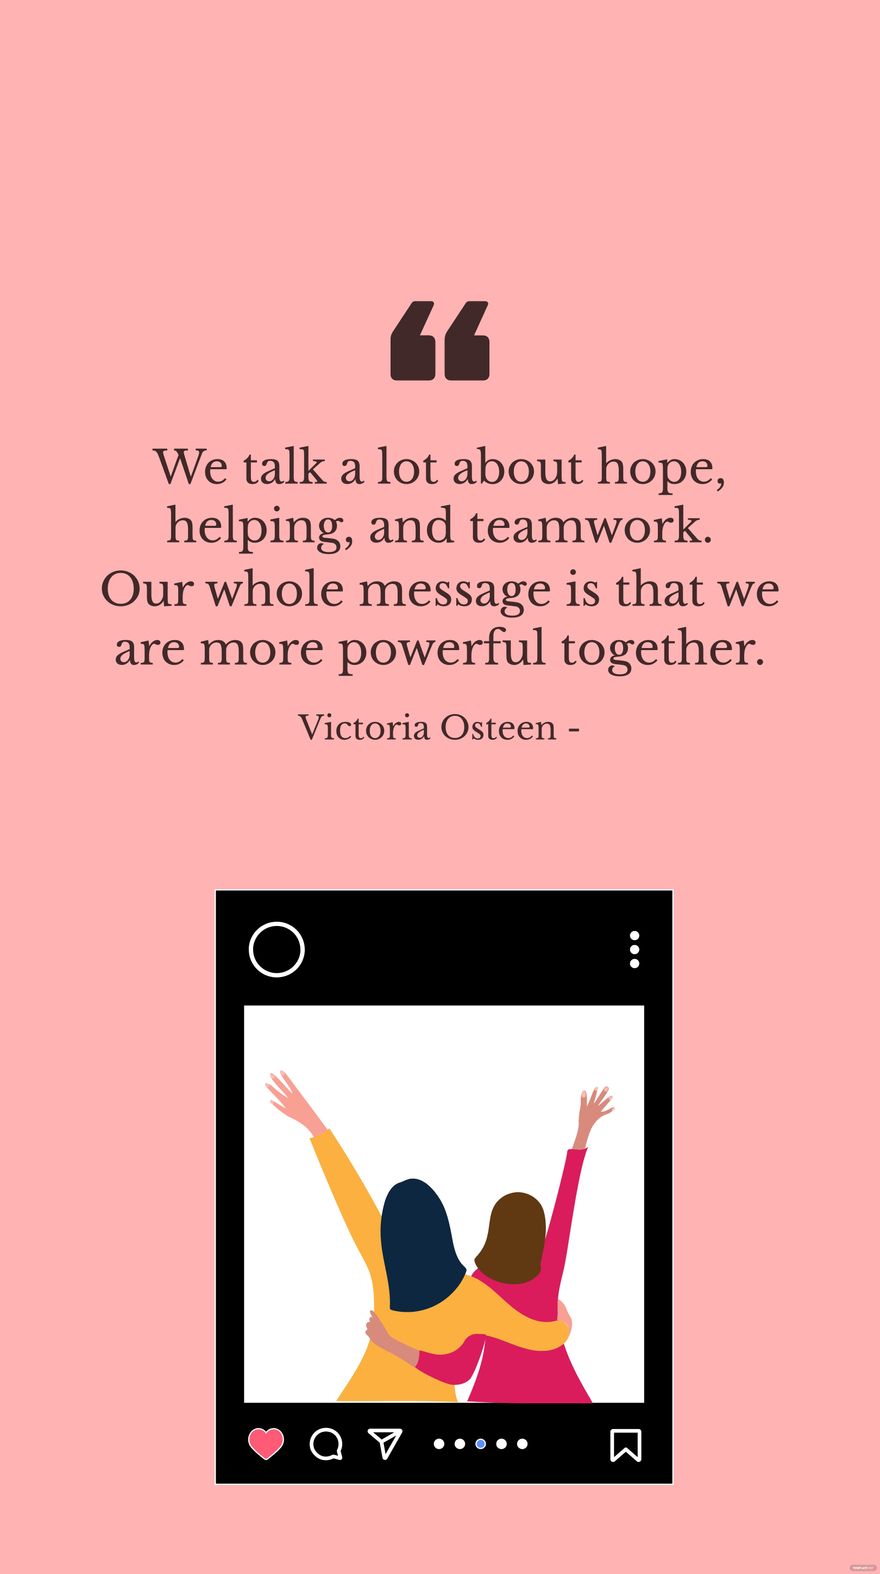 Free Victoria Osteen - We talk a lot about hope, helping, and teamwork. Our whole message is that we are more powerful together.